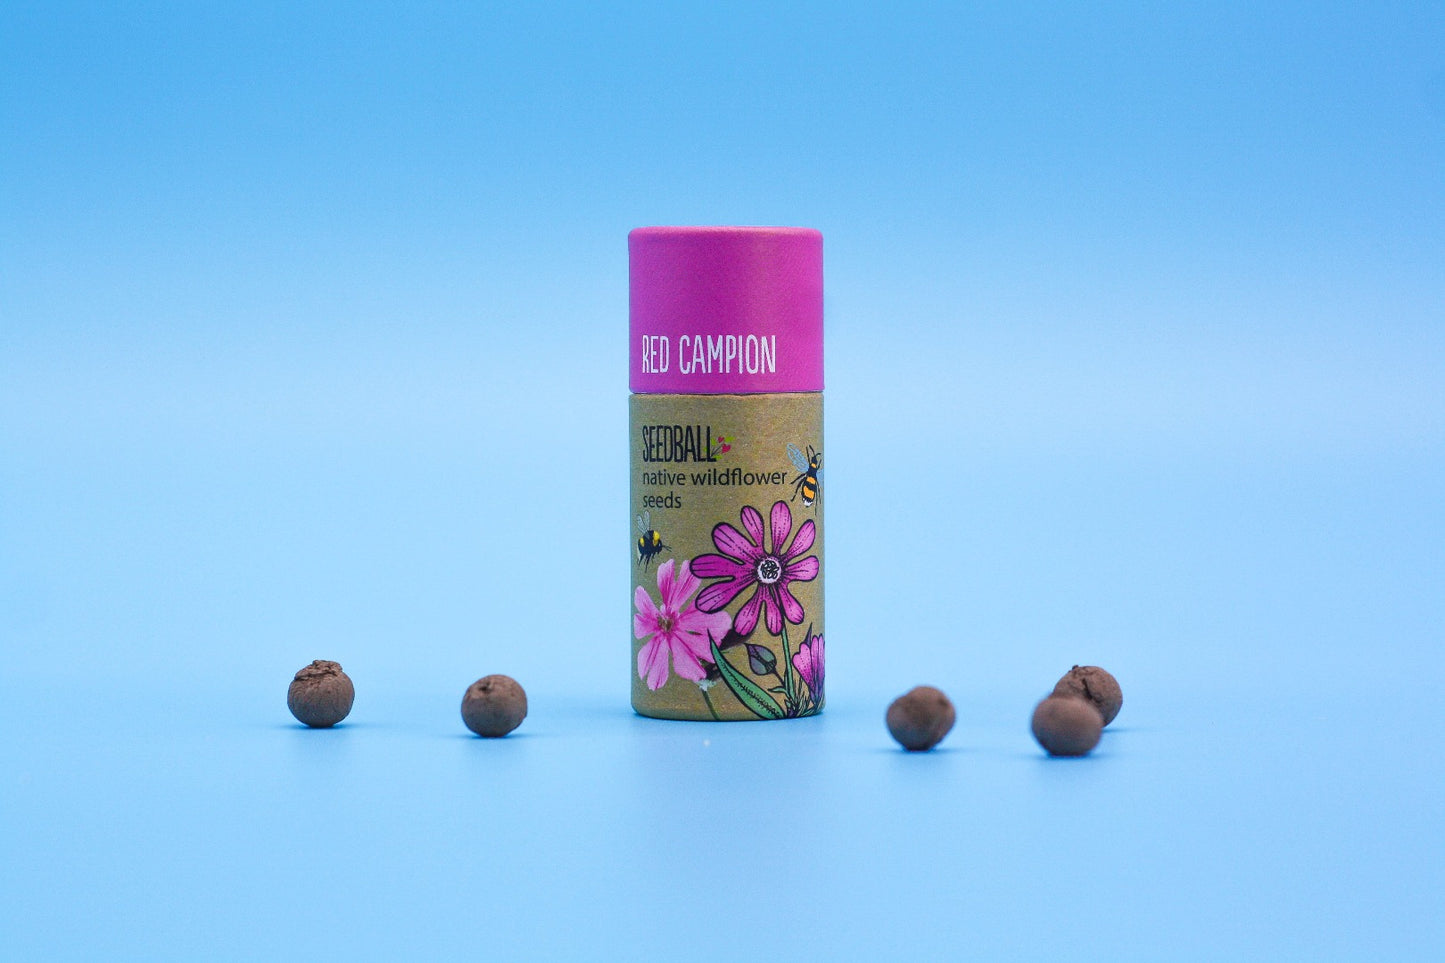 Tube of Red Campion seedballs